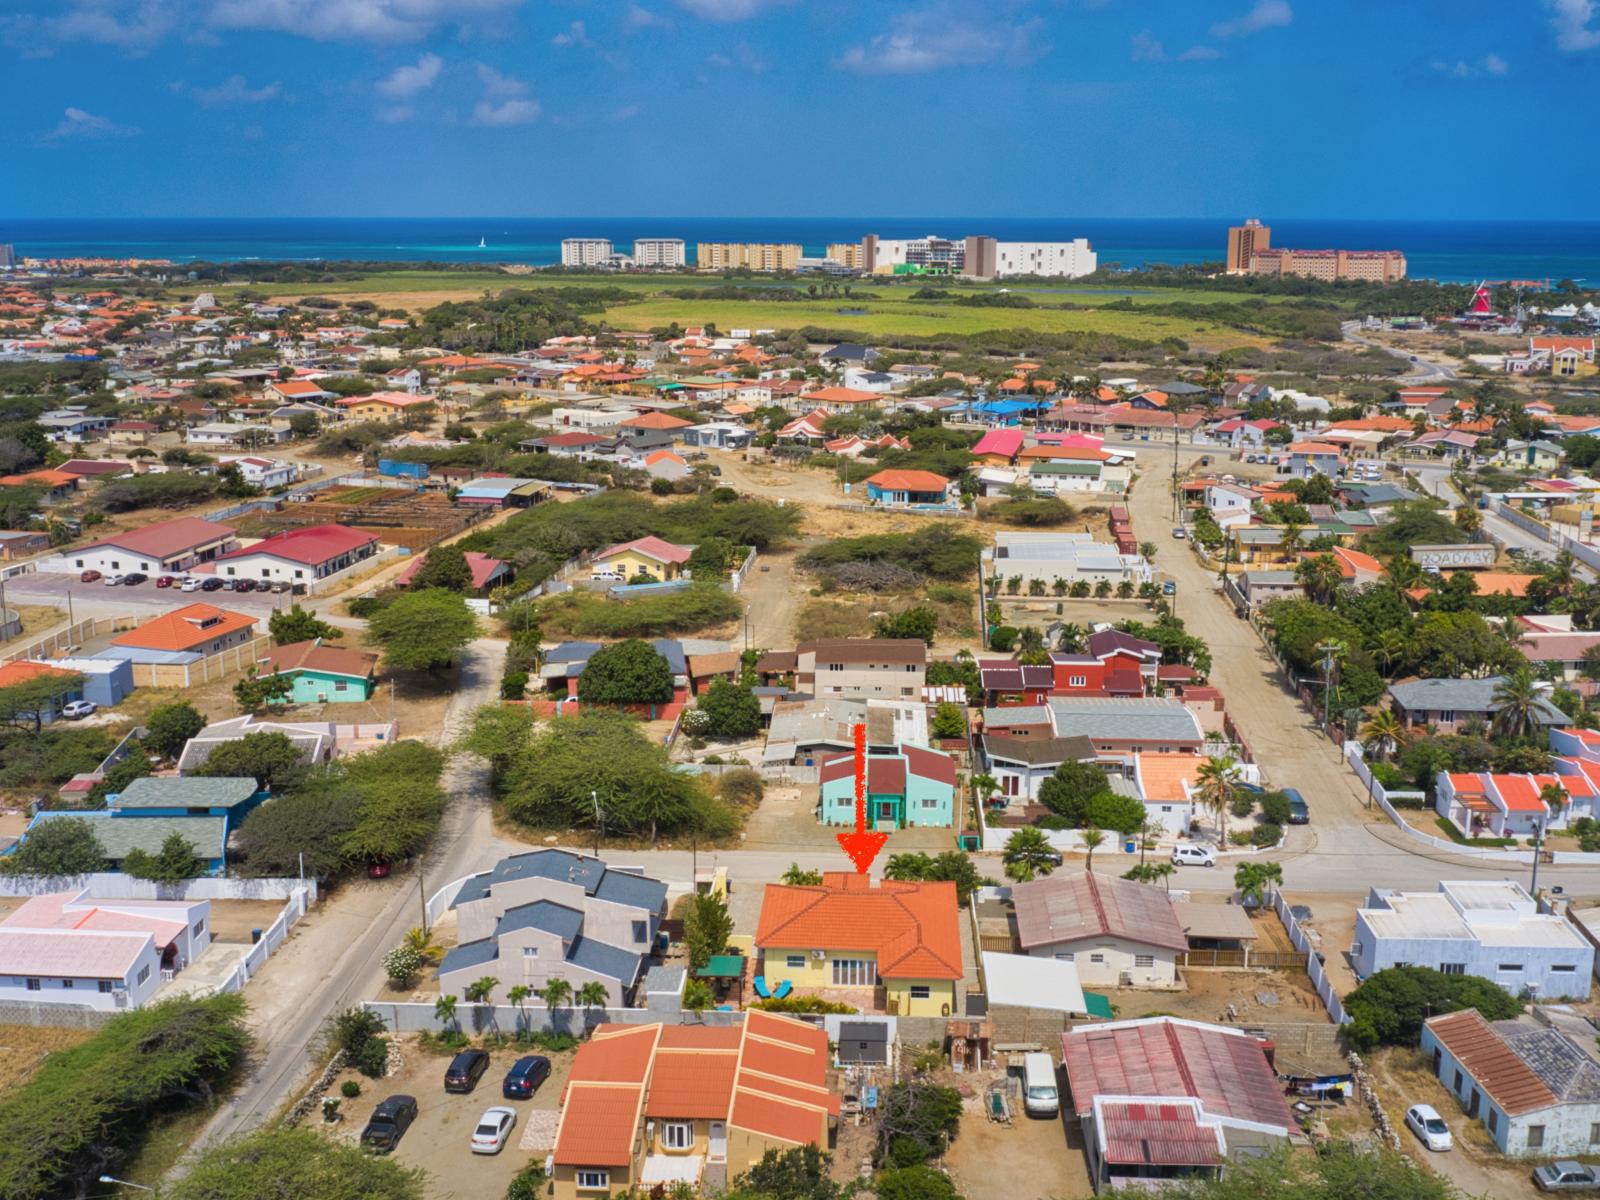 Great location of the home in Noord Aruba close to the beach - Uncover the charm of vibrant neighborhood and close proximity to beach - Experience the pulse of the city from conveniently situated retreat